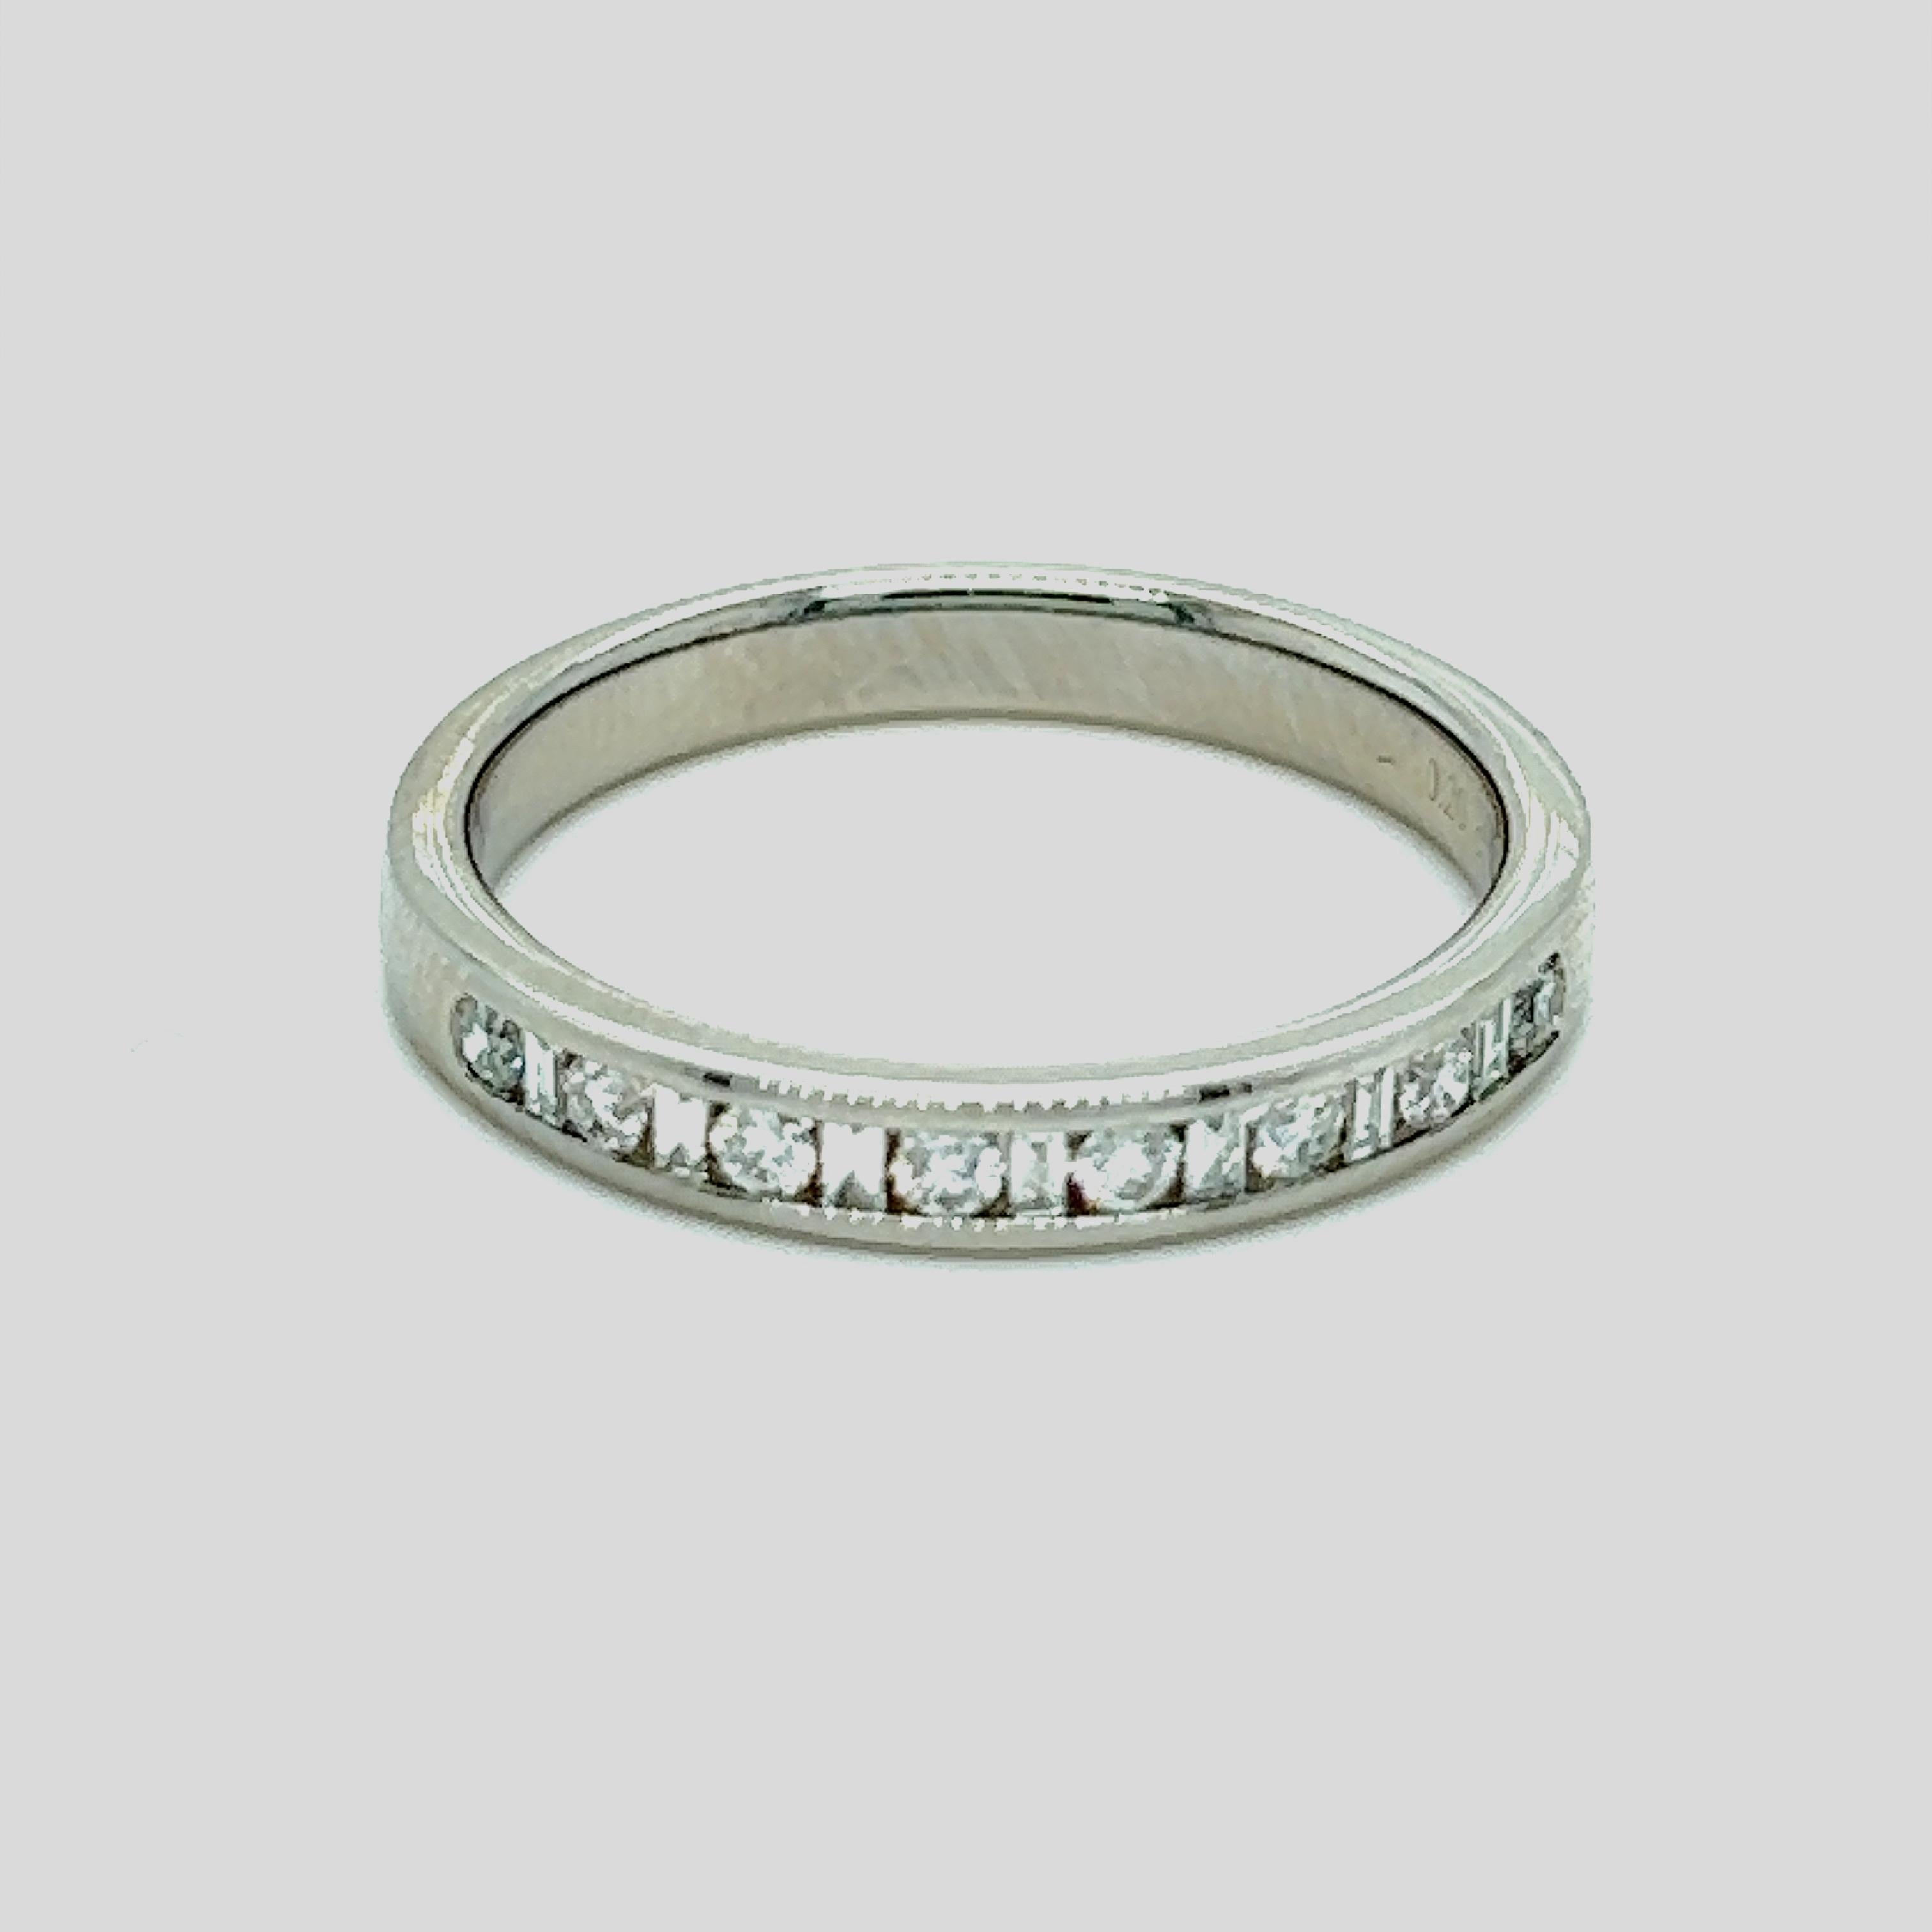 Platinum Diamond Band, the Diamond ring is handcrafted using specially calibrated diamonds in H colour and SI clarity with a Total Diamond weight of 0.20ct.

Ethically sourced, each is hand selected for it’s cut, polish and symmetry.